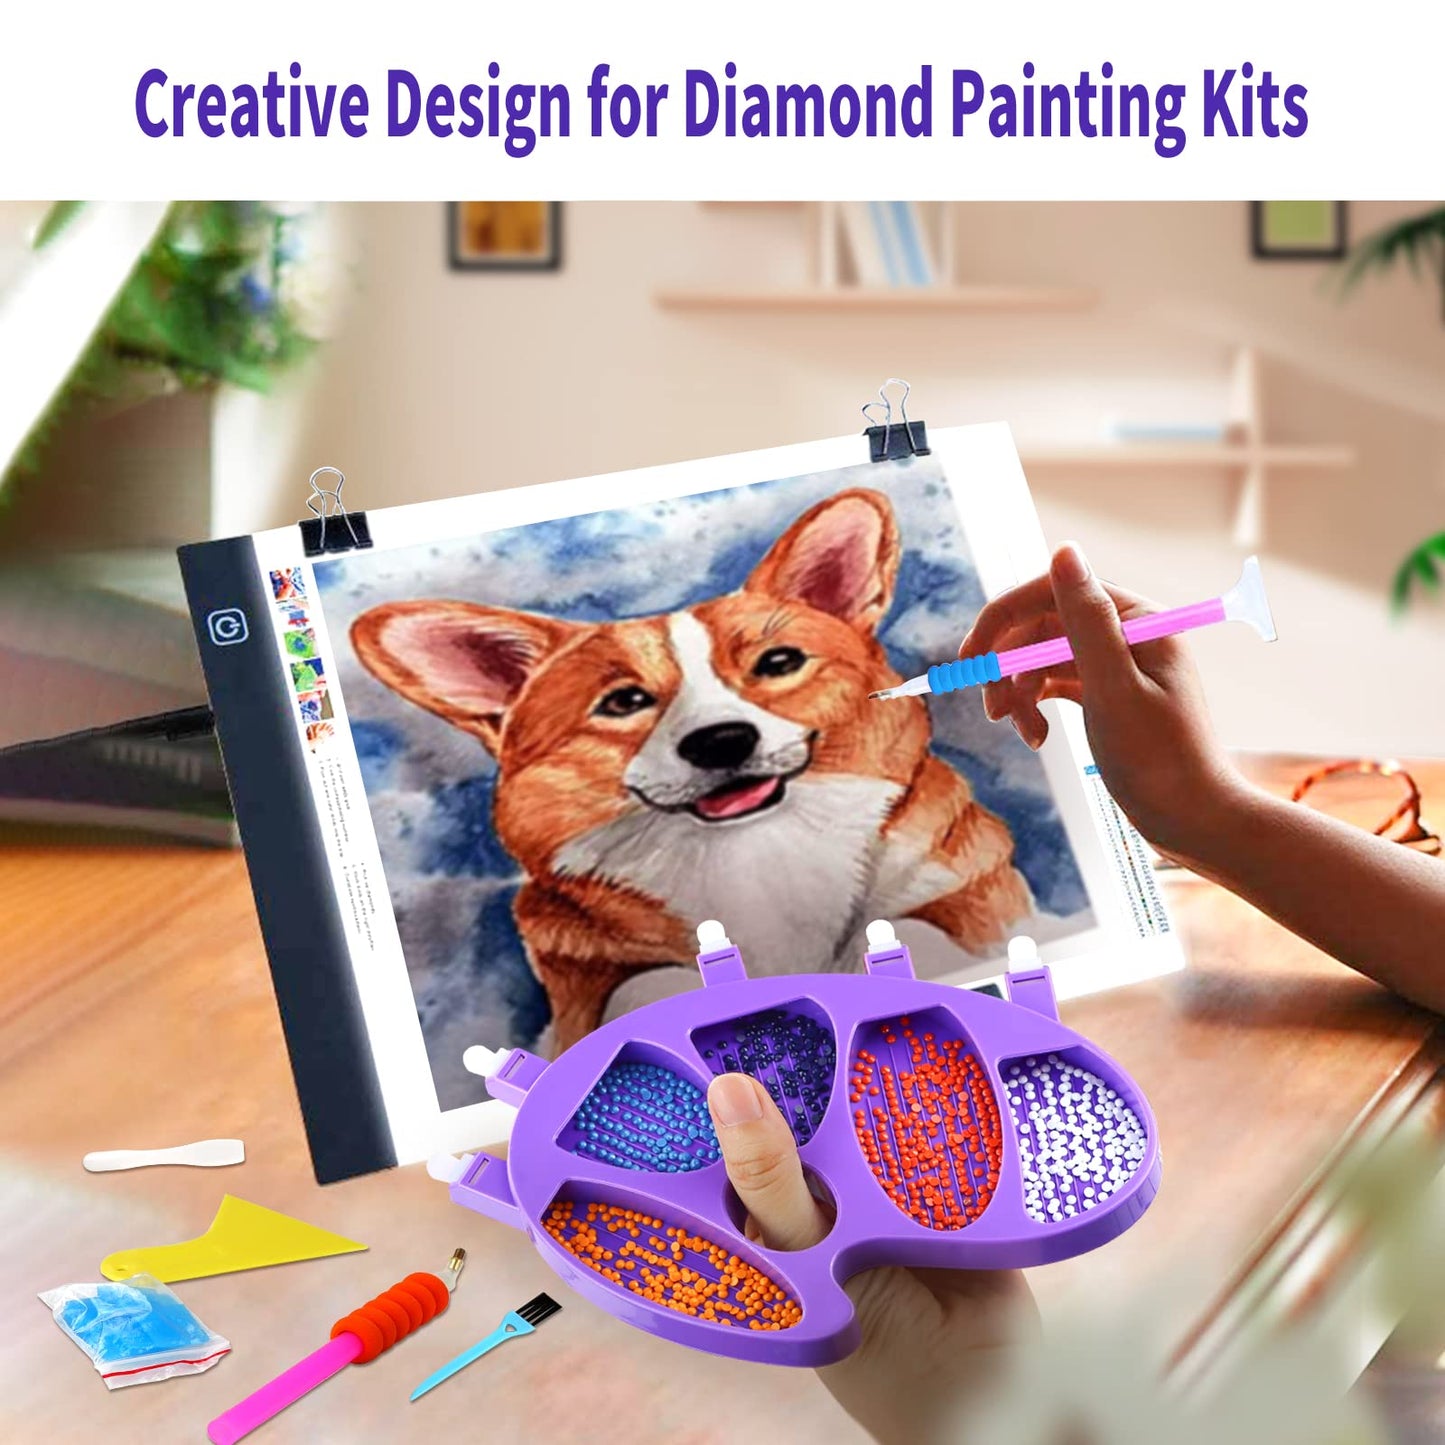 Diamond Painting Tools | 5 Section Palm Trays